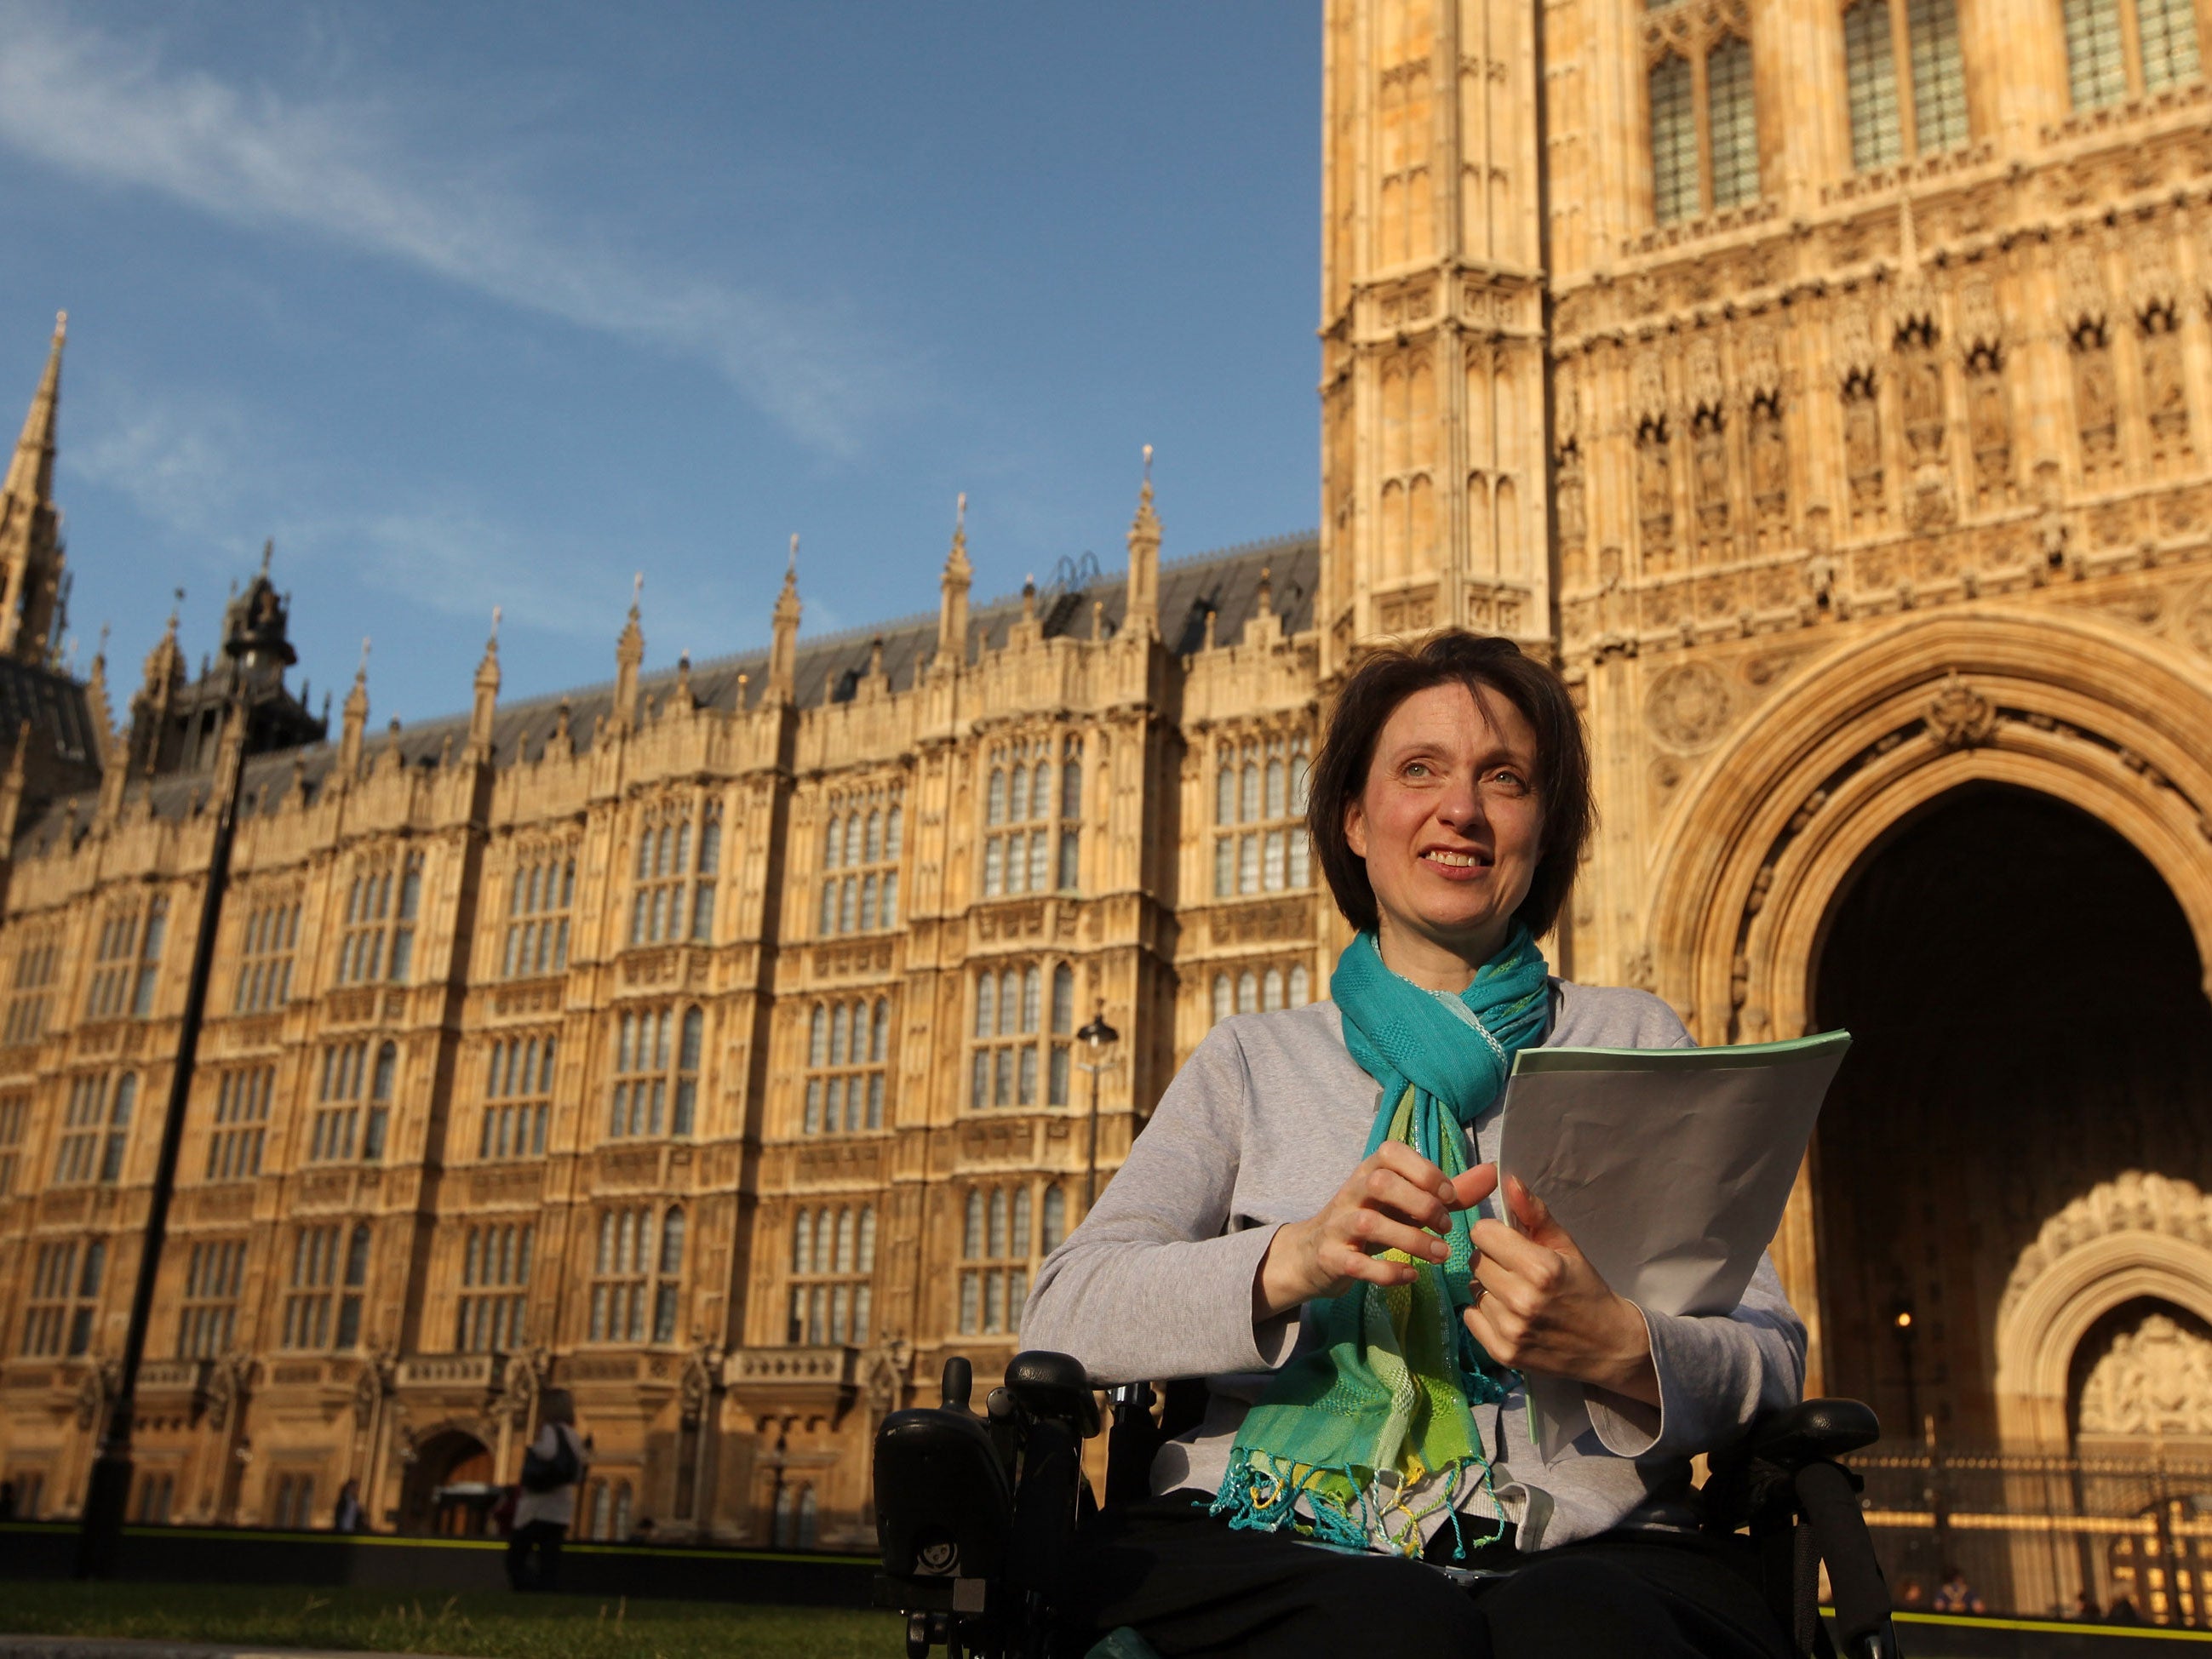 Debbie Purdy from Bradford pictured in front of the House of Lords following the Law Lords historic decision to clarify the law on assisted suicide on July 30, 2009